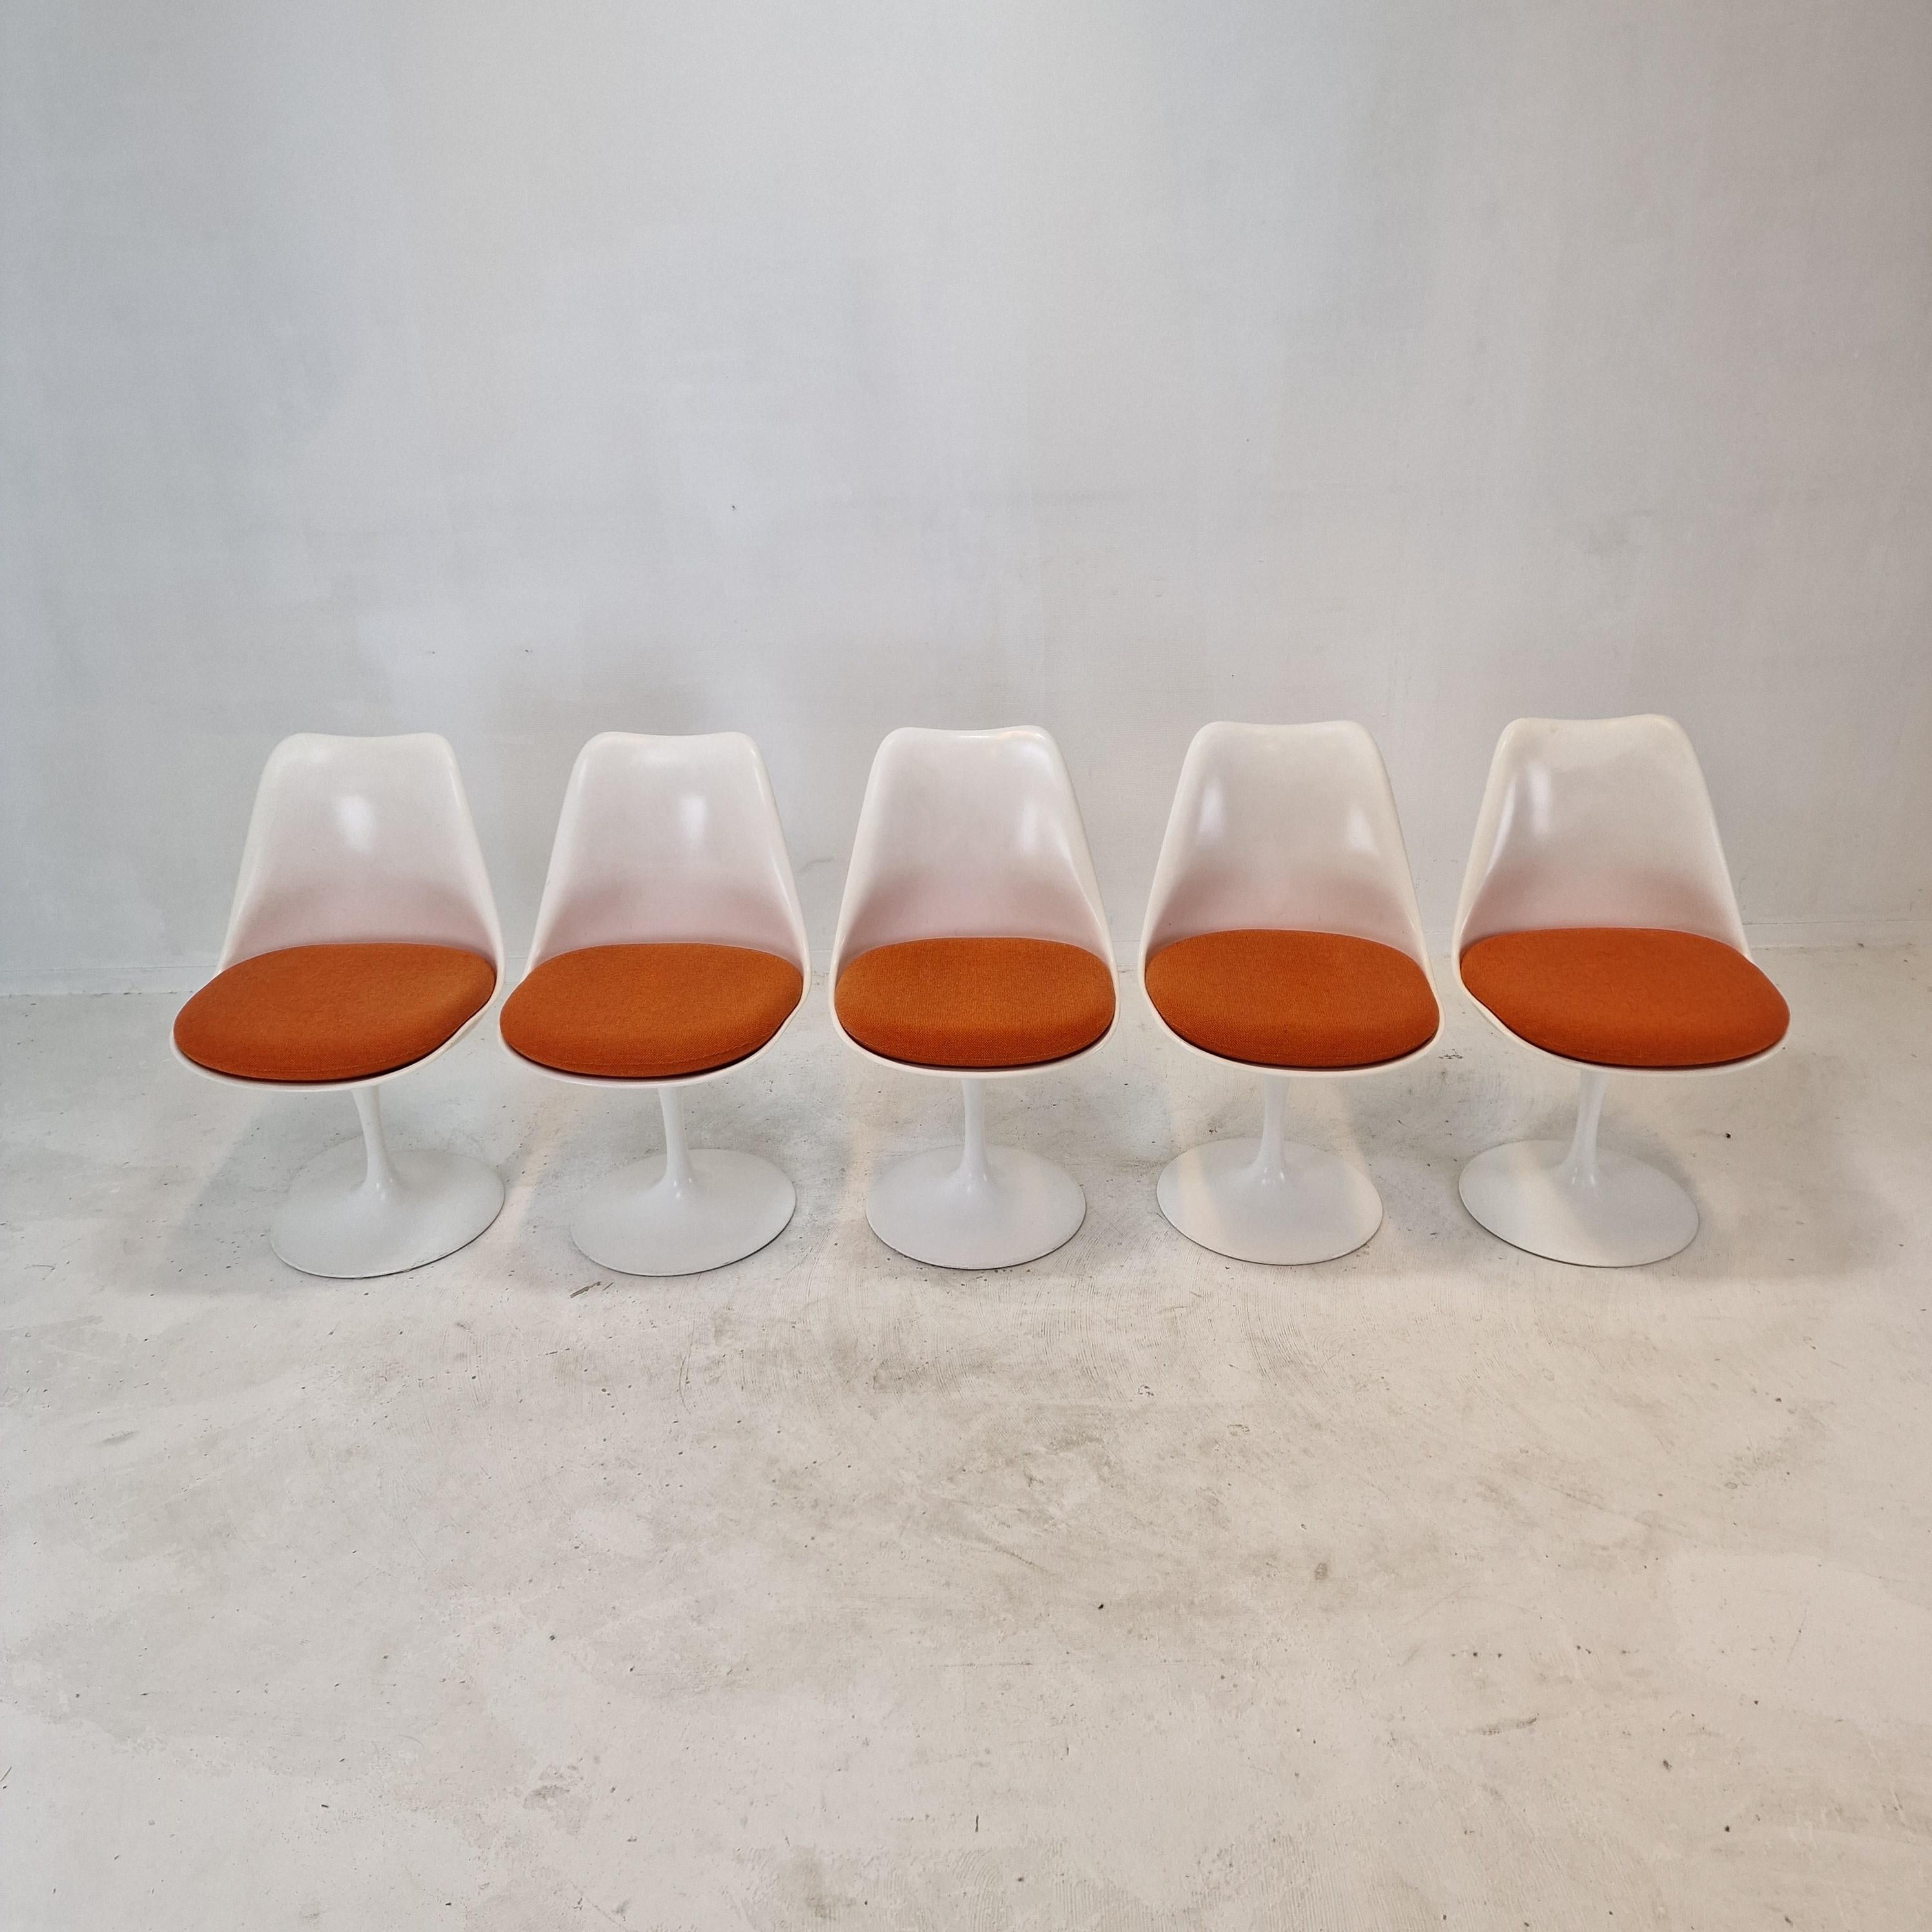 Knoll Marble Dining Table With 5 Chairs by Eero Saarinen, 1960s For Sale 5